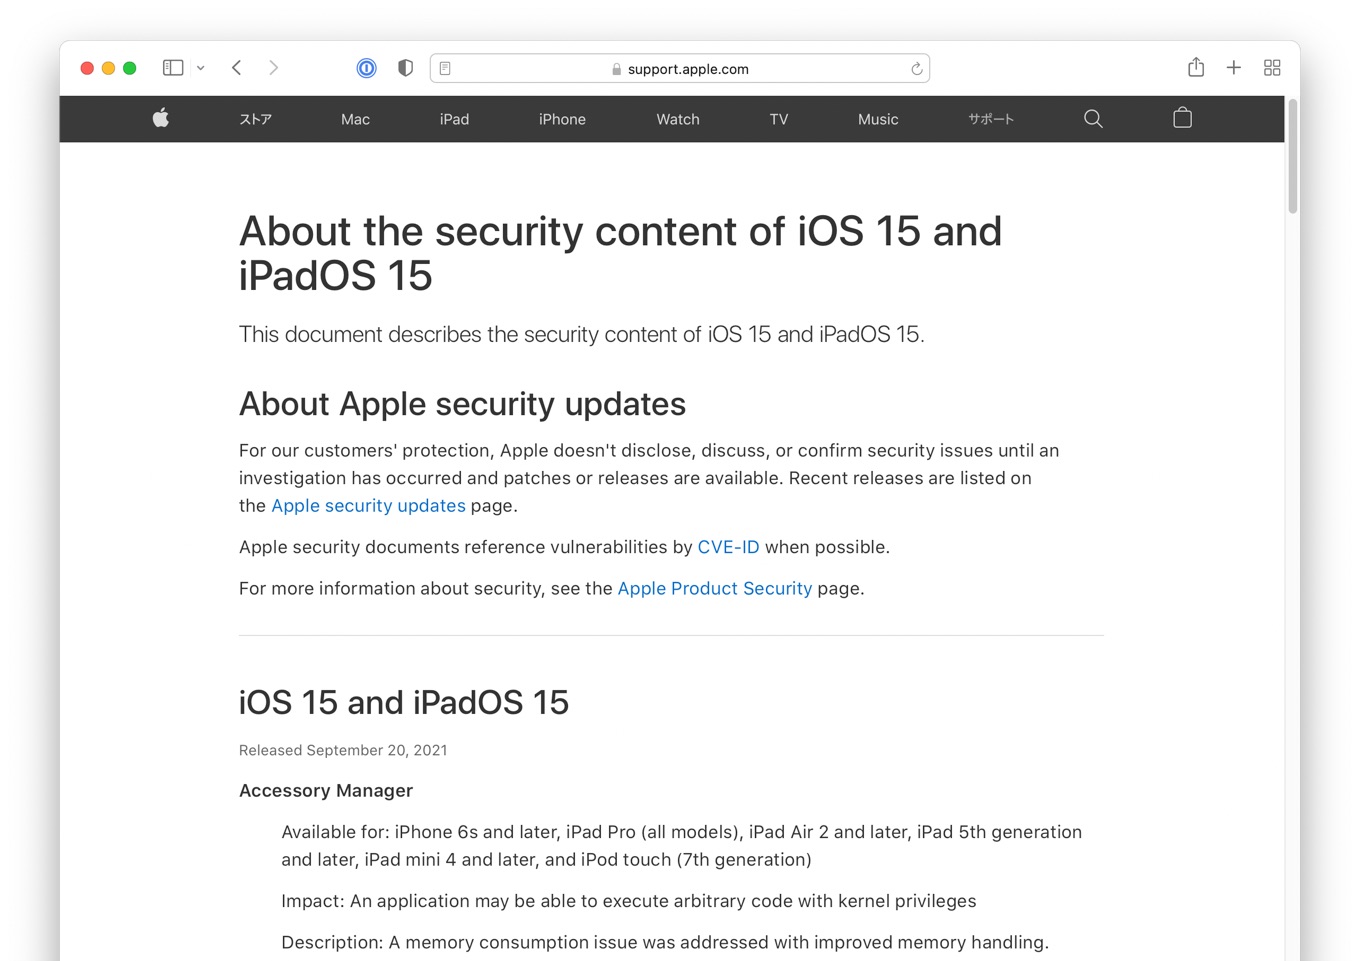 About the security content of iOS 15 and iPadOS 15